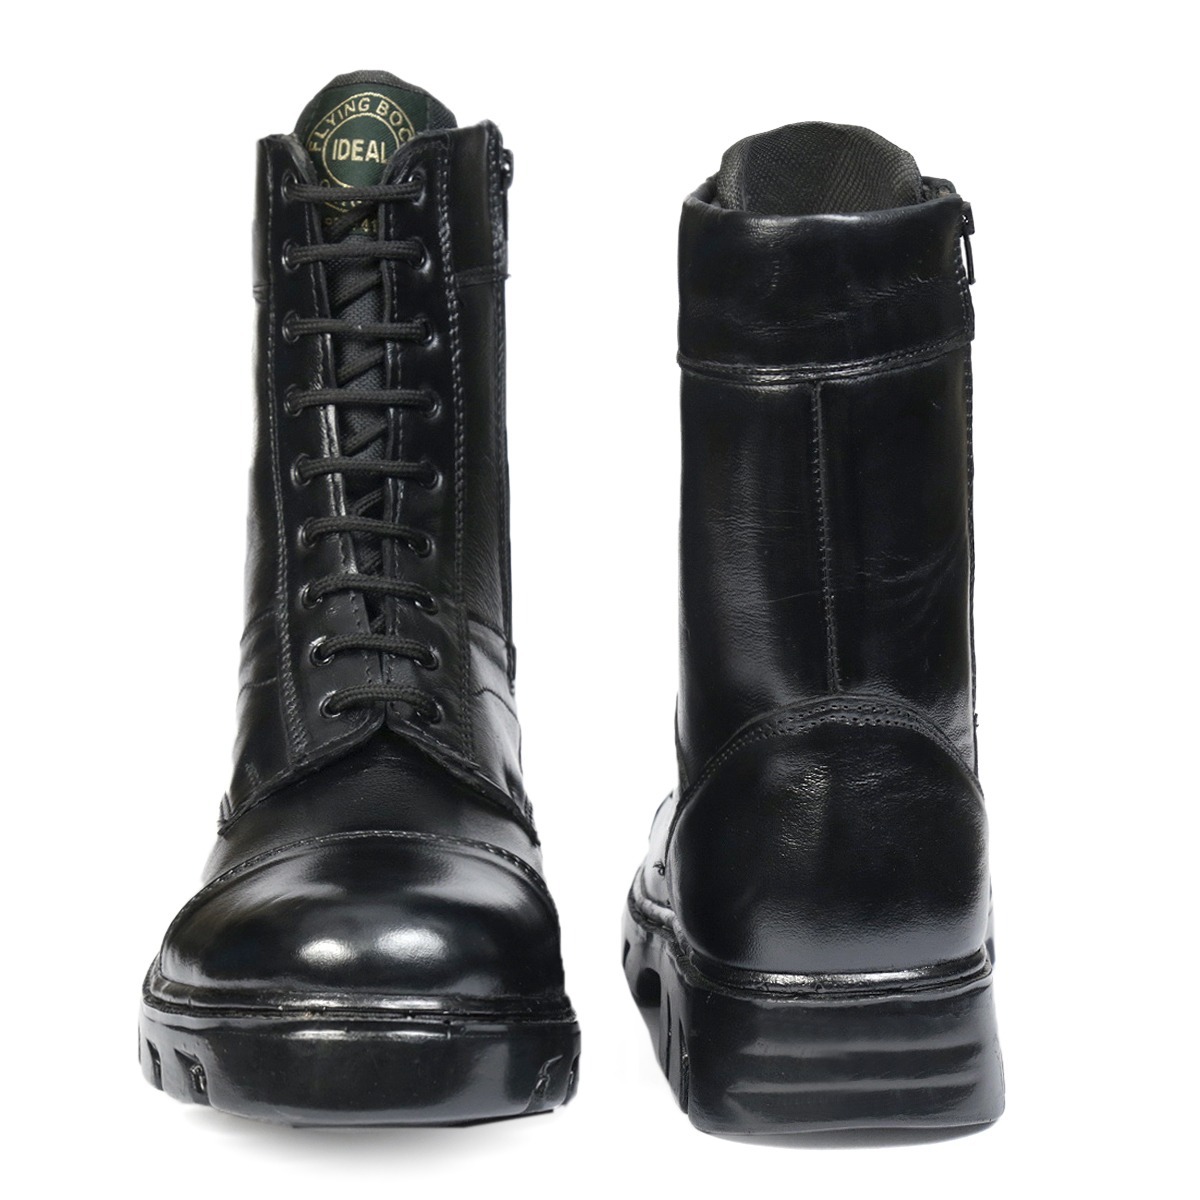 MEN'S ARMY BOOTS